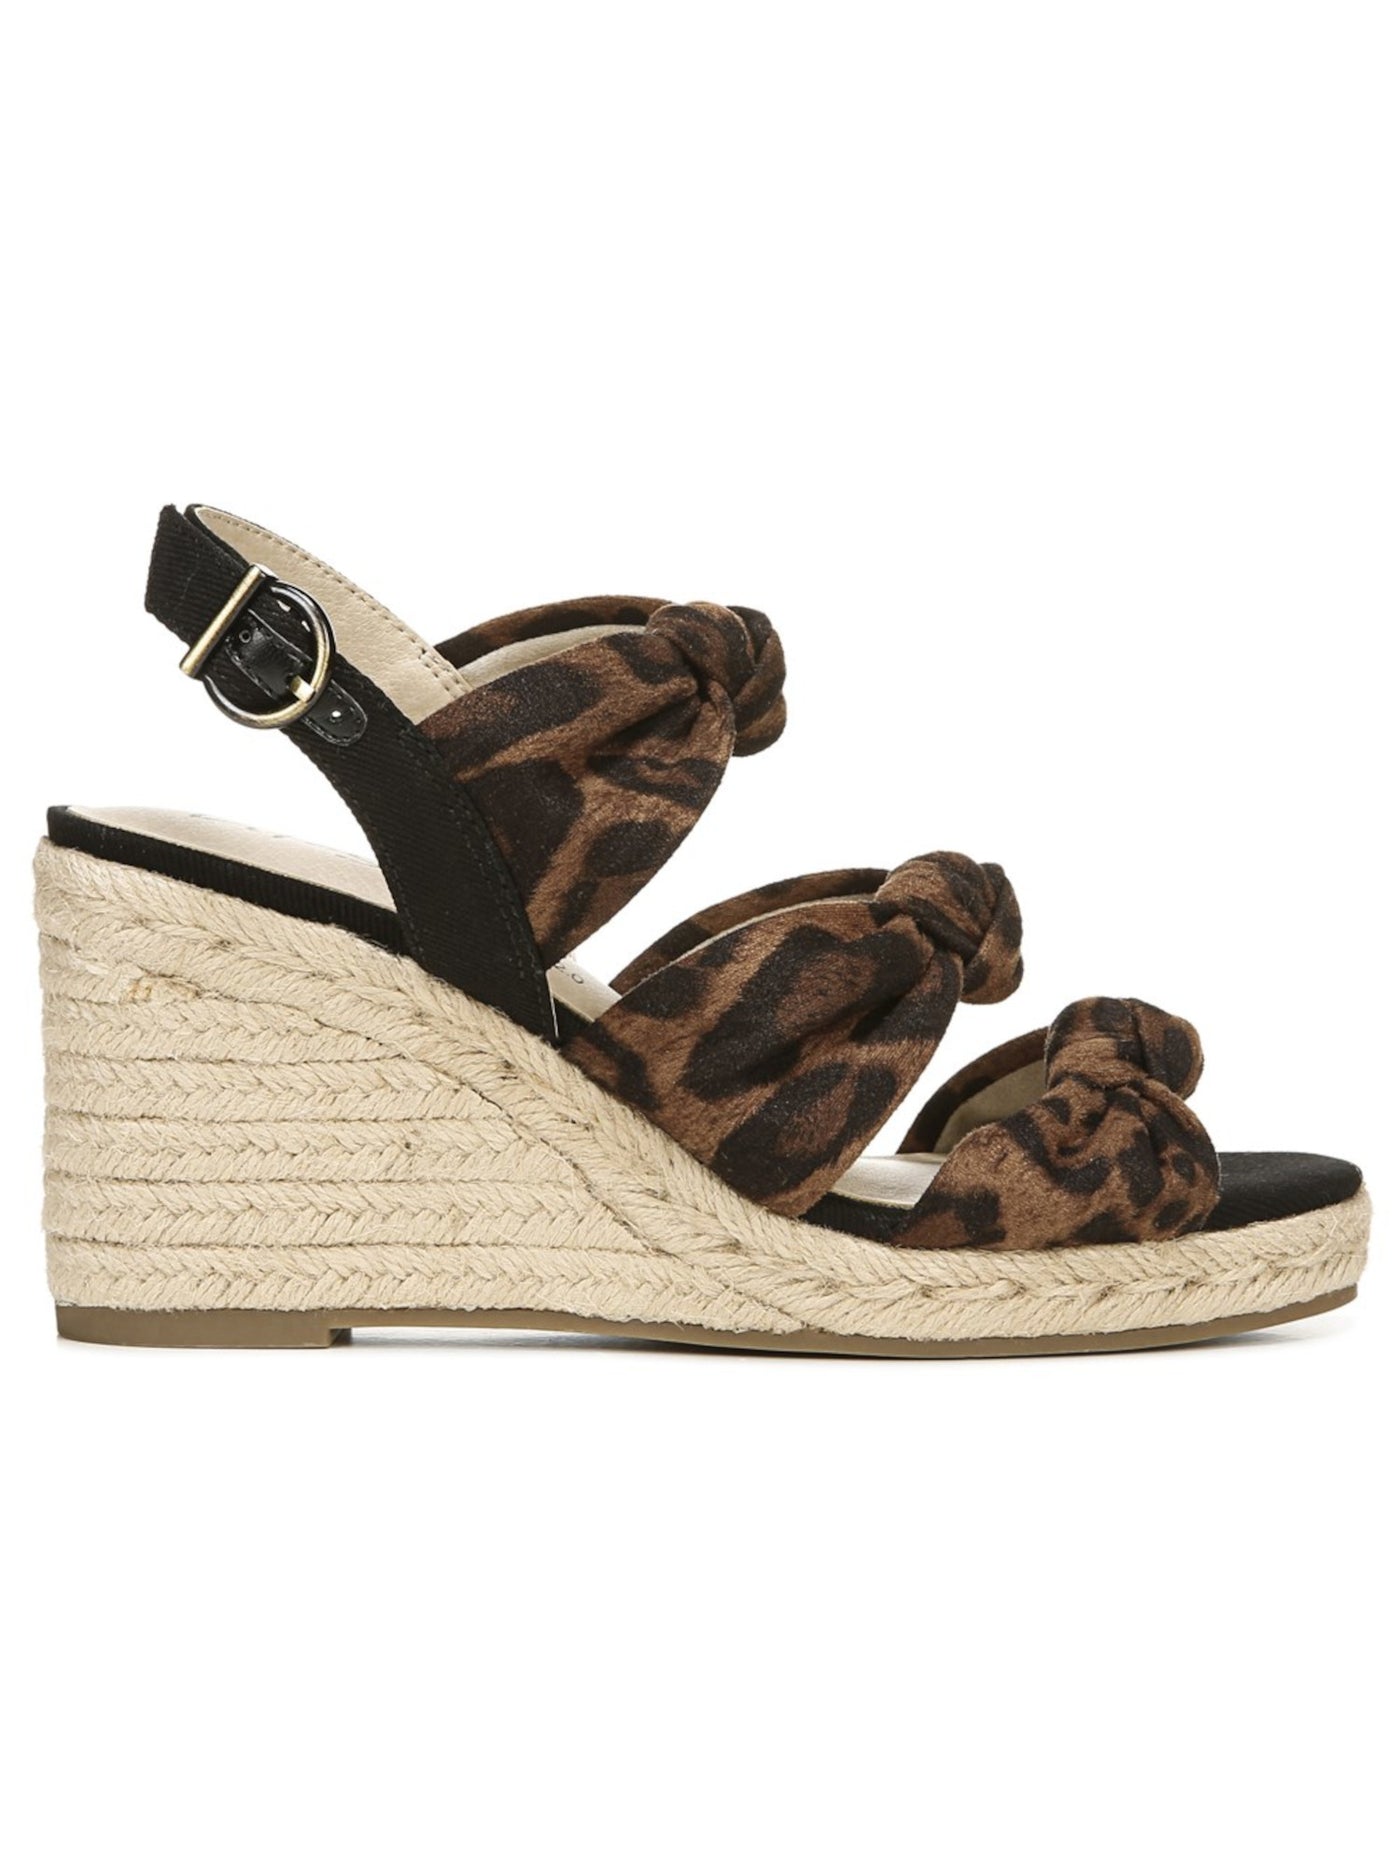 LIFE STRIDE Womens Brown Animal Print Knotted Straps Cushioned Goring Talent Open Toe Wedge Buckle Espadrille Shoes 9 M